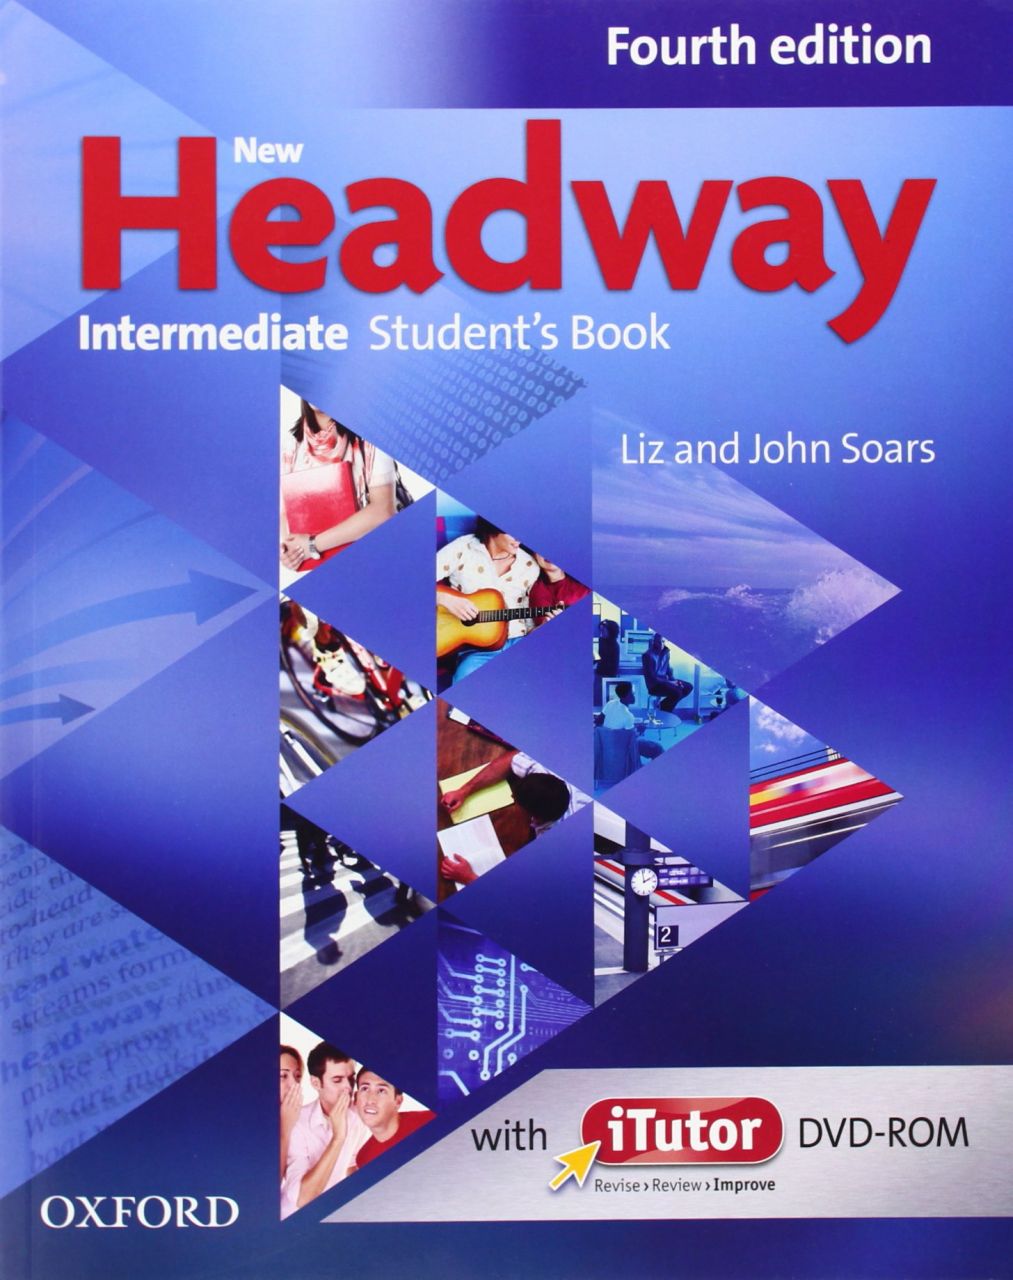 NEW HEADWAY INTERMEDIATE 4th ED Student's Book with iTutor DVD-ROM